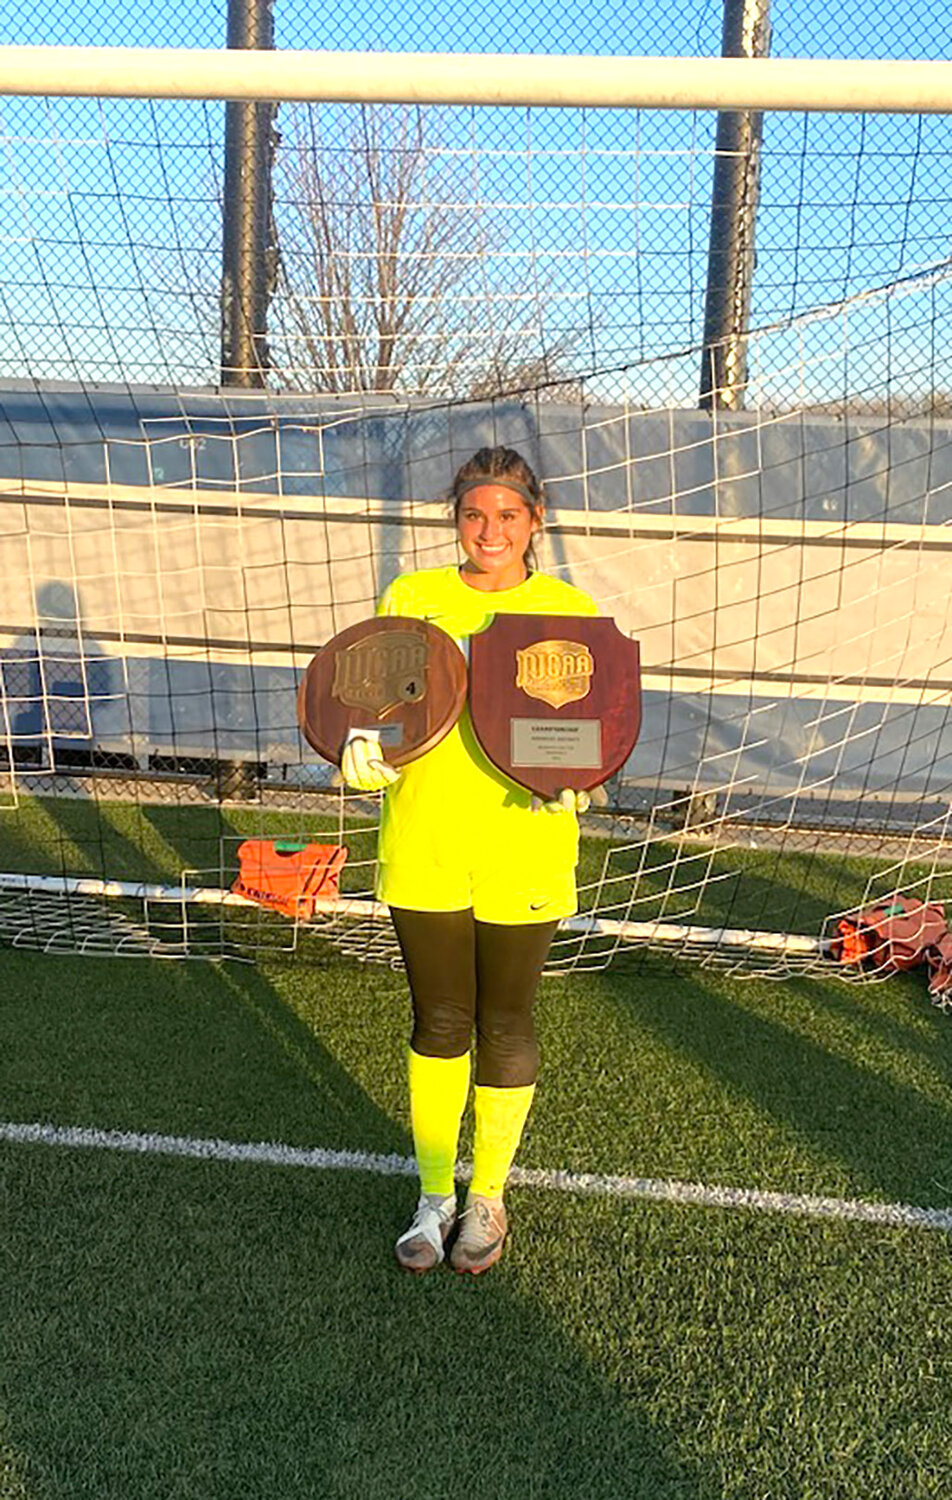 Naitzy Garcia spent her first season on Rock Valley soccer ream as goalkeeper.